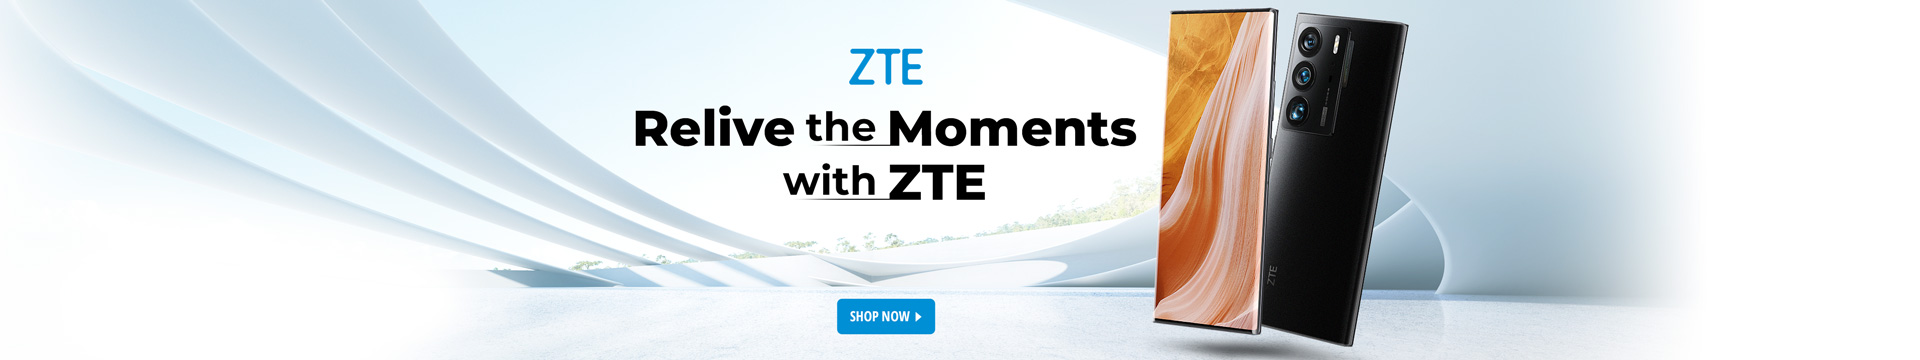 Relive the Moments with ZTE